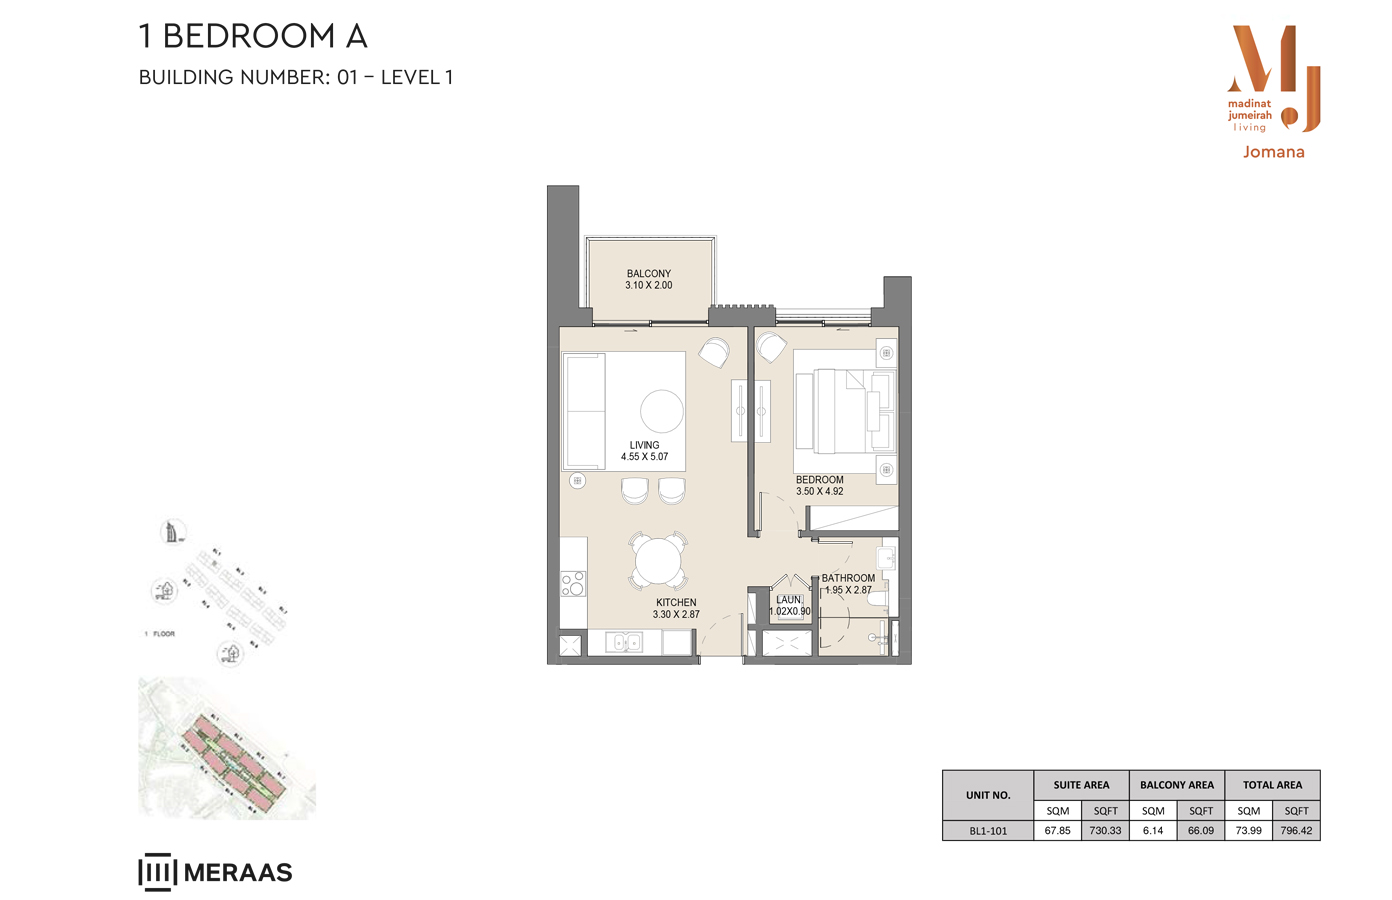 1 Bedroom A, Level 1